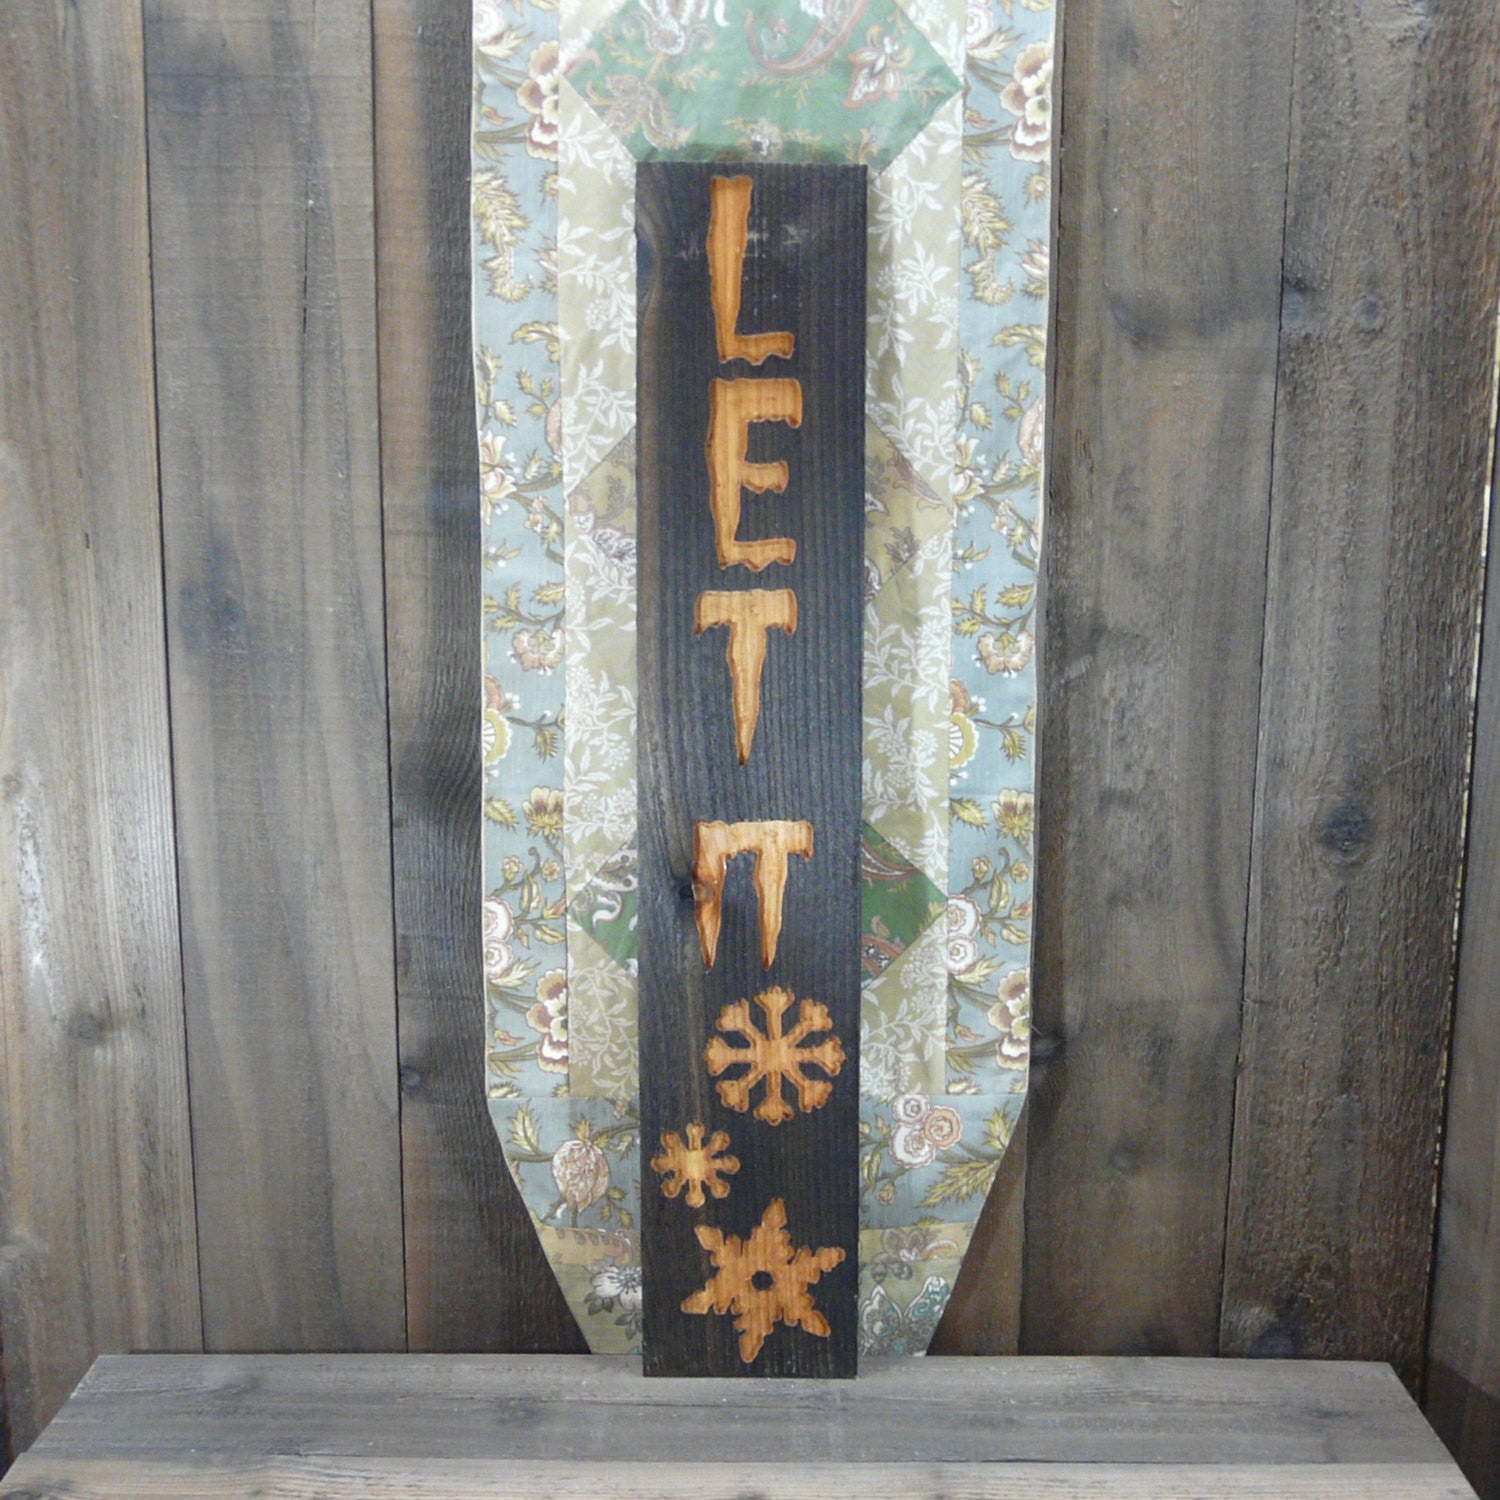 Let It Snow Rustic Weathered Wood Sign - Cabin Style Carved Engraved Barn Wood Decor